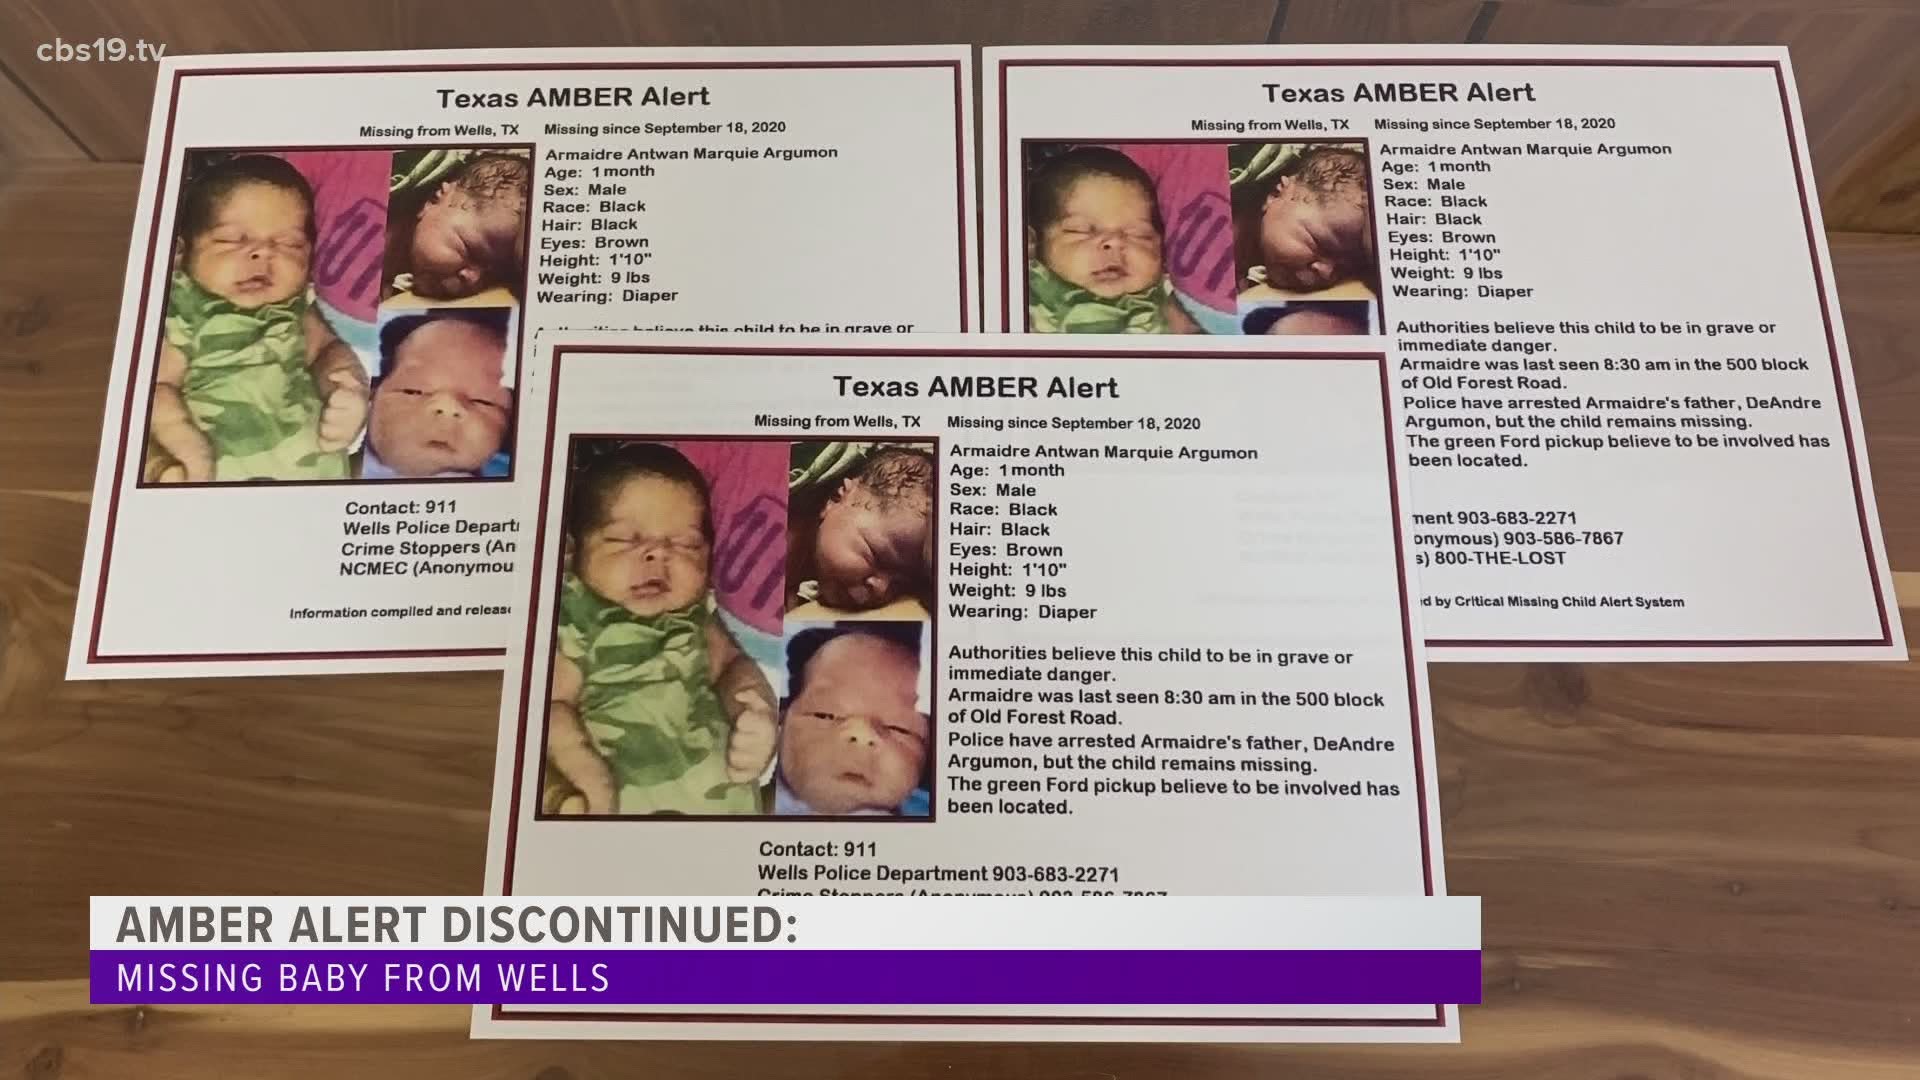 The baby from Wells is still missing, according to the Wells Police Department.